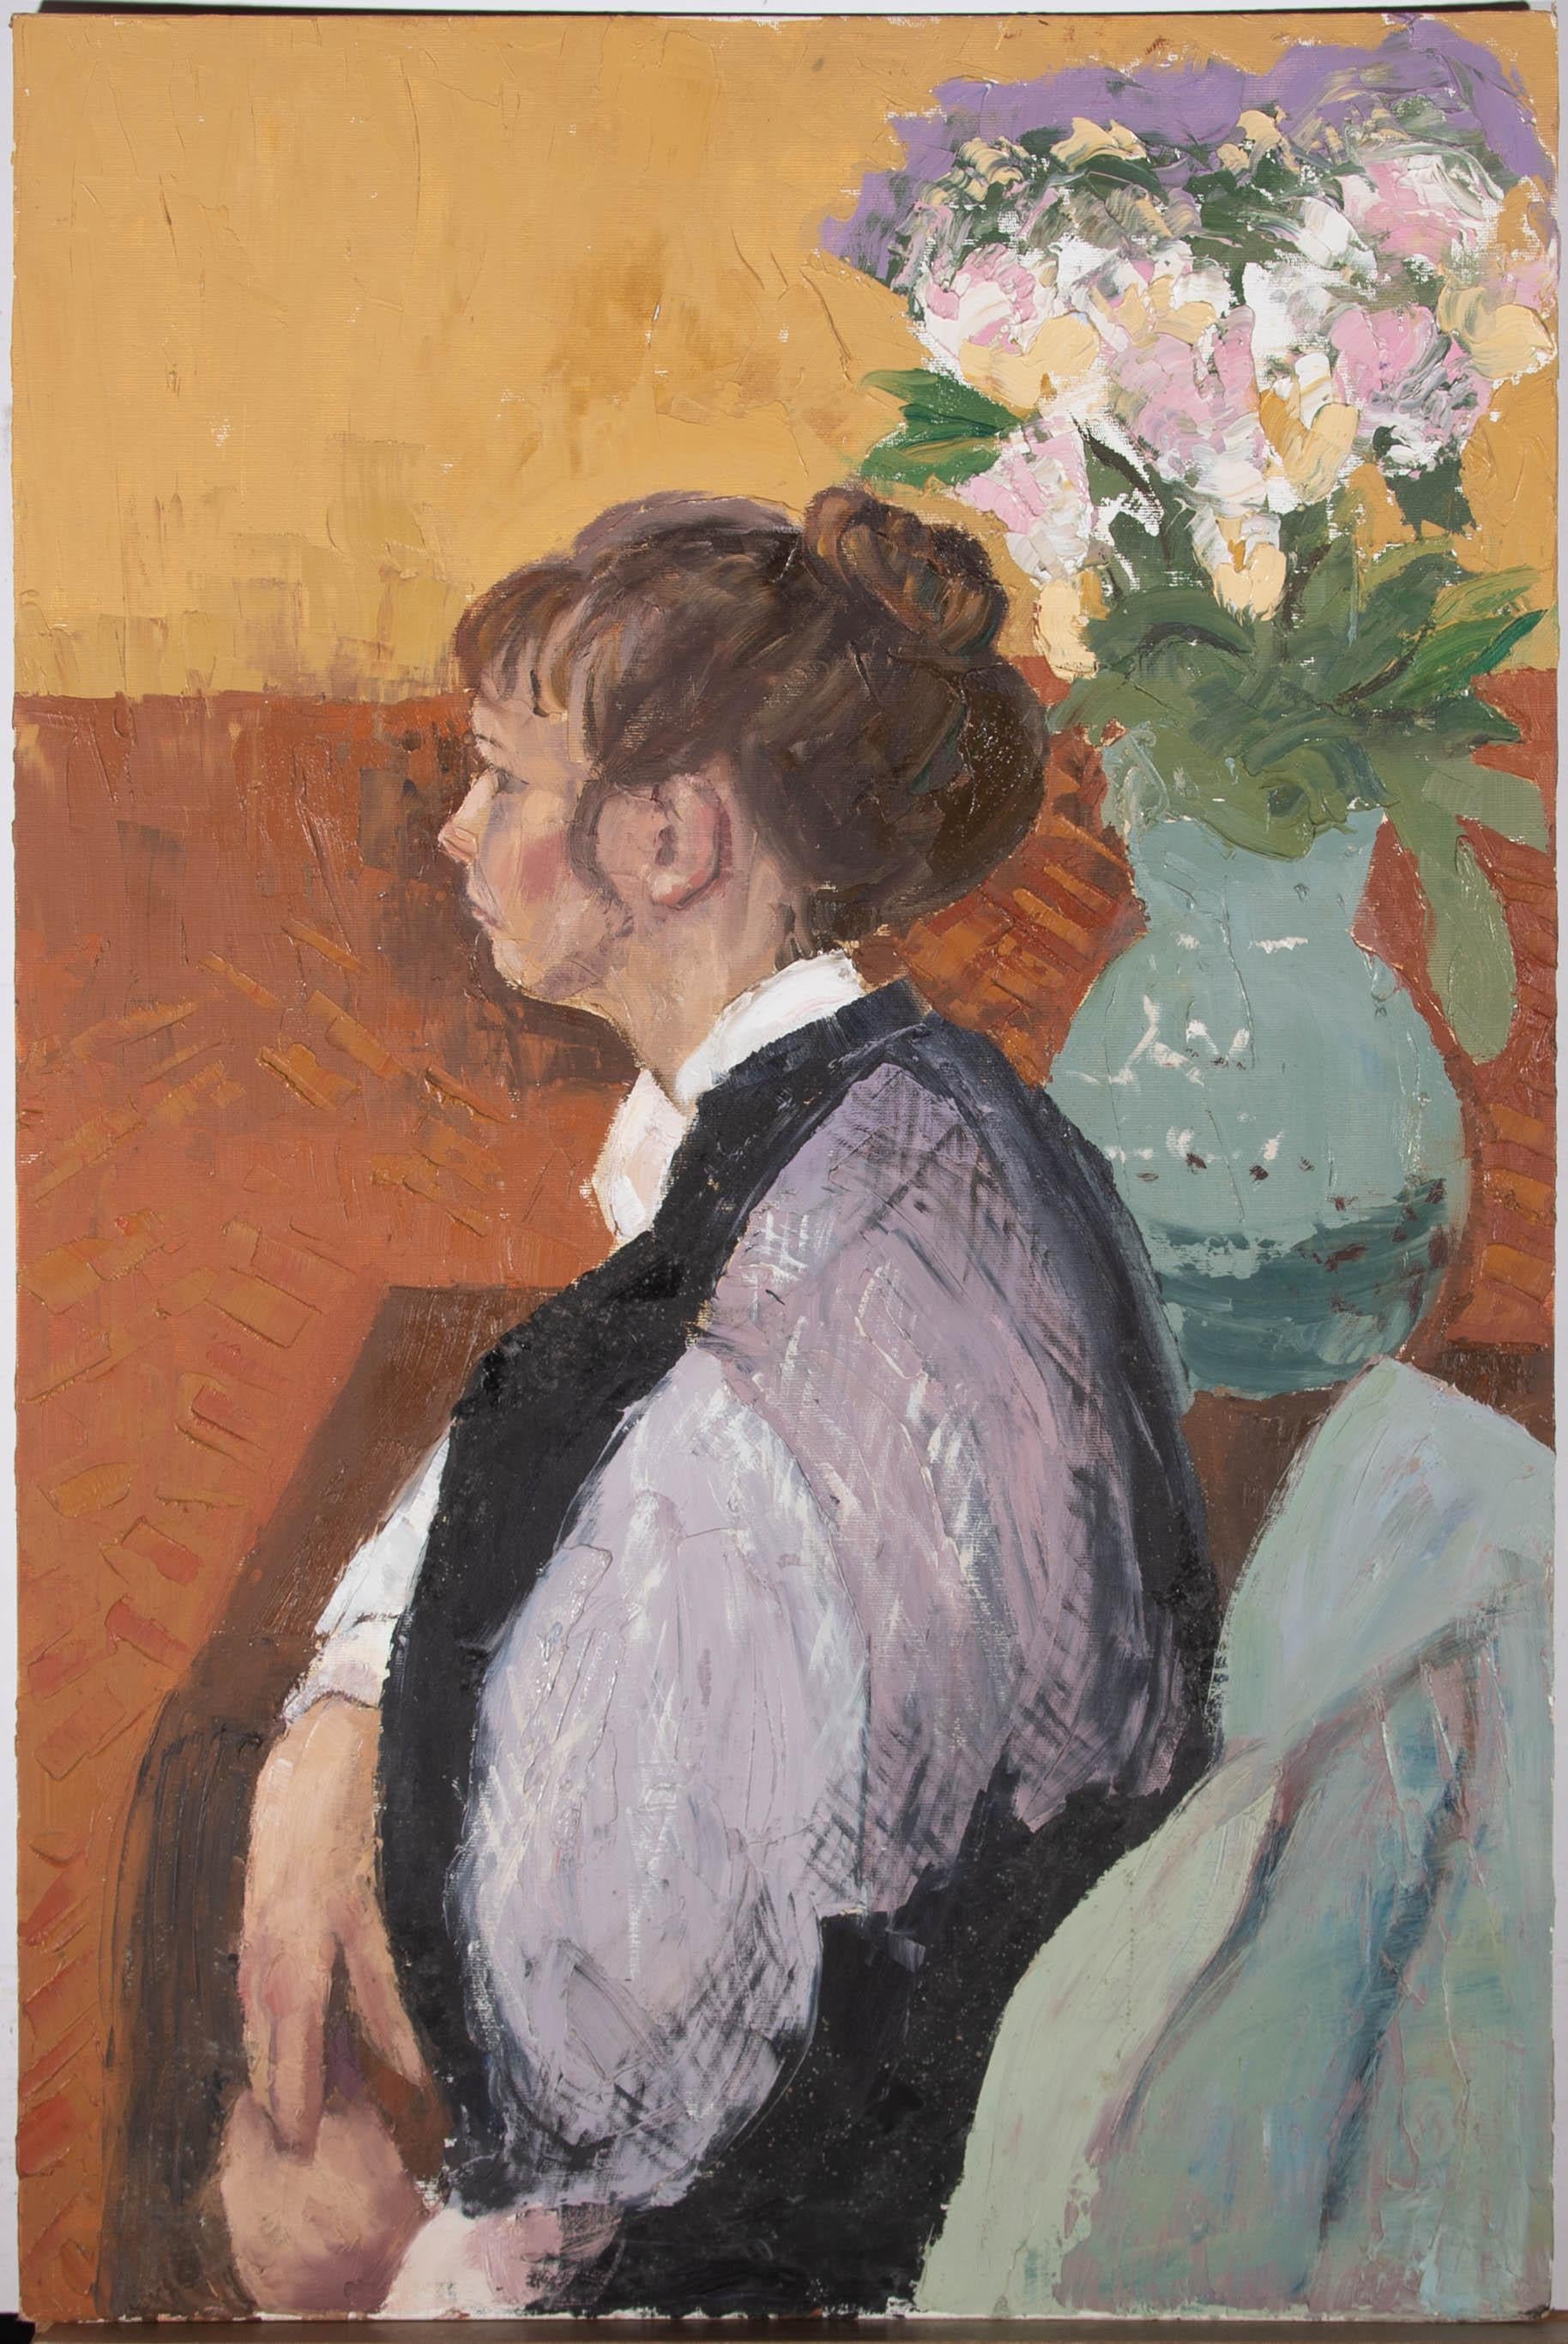 A fine 20th Century impasto painting showing a young woman sitting in profile next to a bunch of flowers in a large vase. The painting is unsigned. On canvas board.